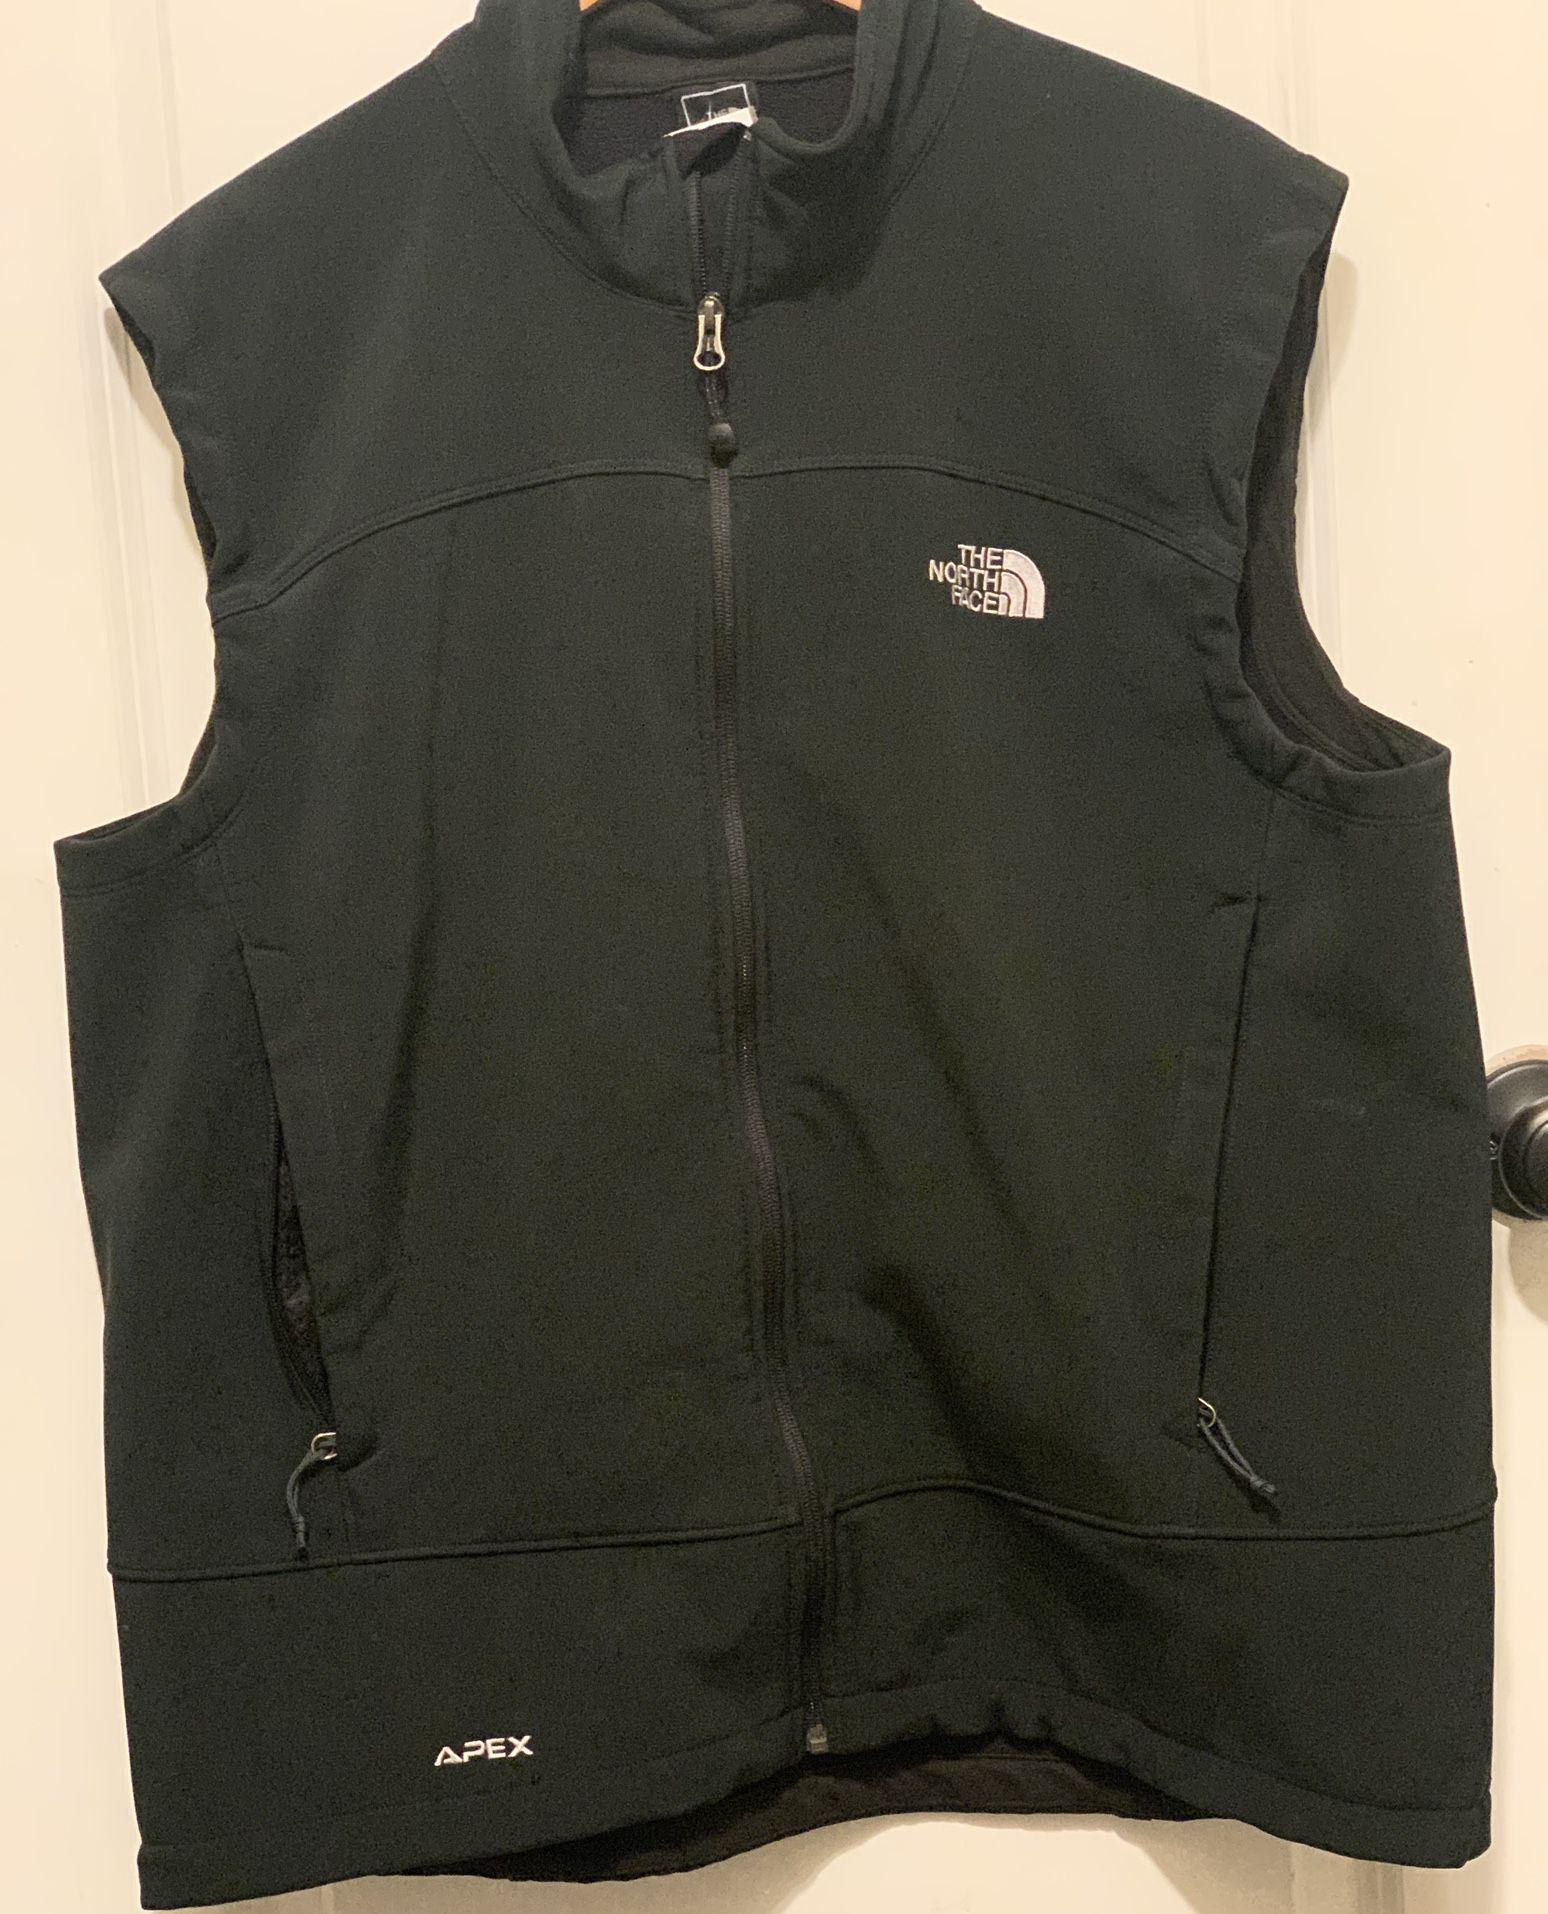 The North Face Apex Vest Bionic 2  Size XXL Gently Used